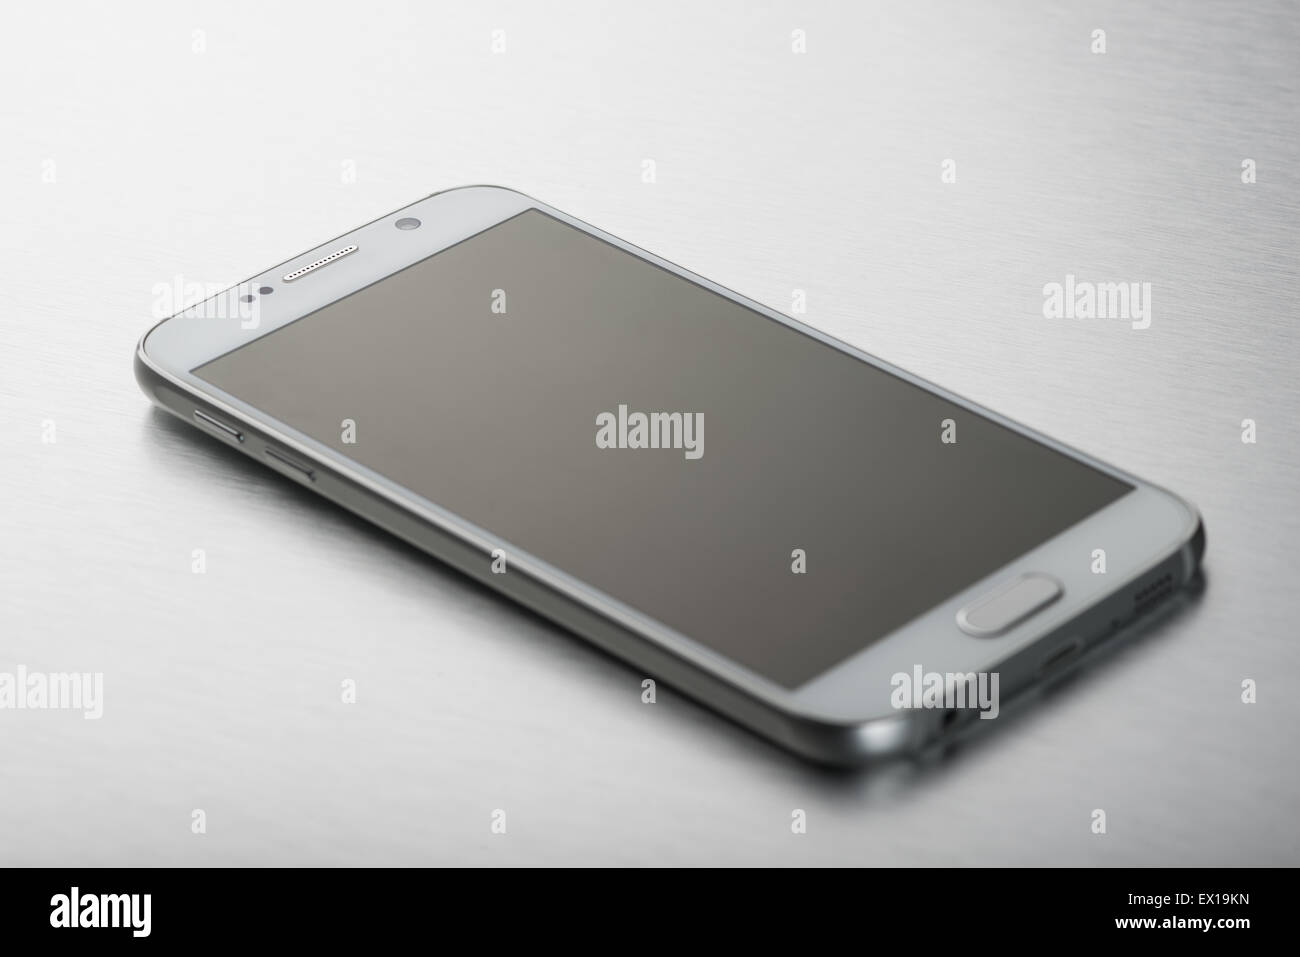 Smart phone on stainless steel background Stock Photo